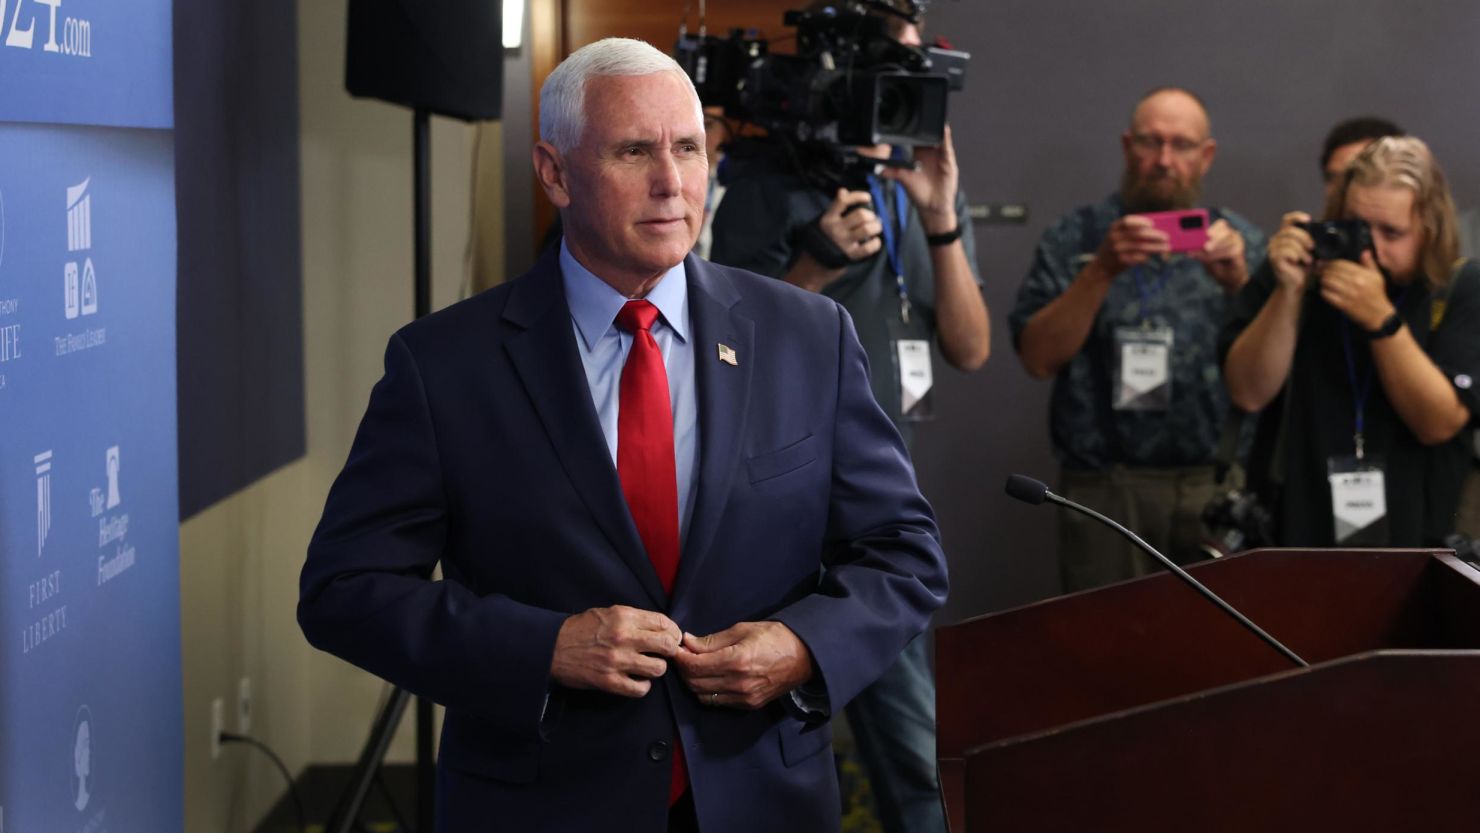 Republican presidential candidate Mike Pence speaks to the press after addressing guests at the Family Leadership Summit in Des Moines, Iowa, on July 14, 2023.